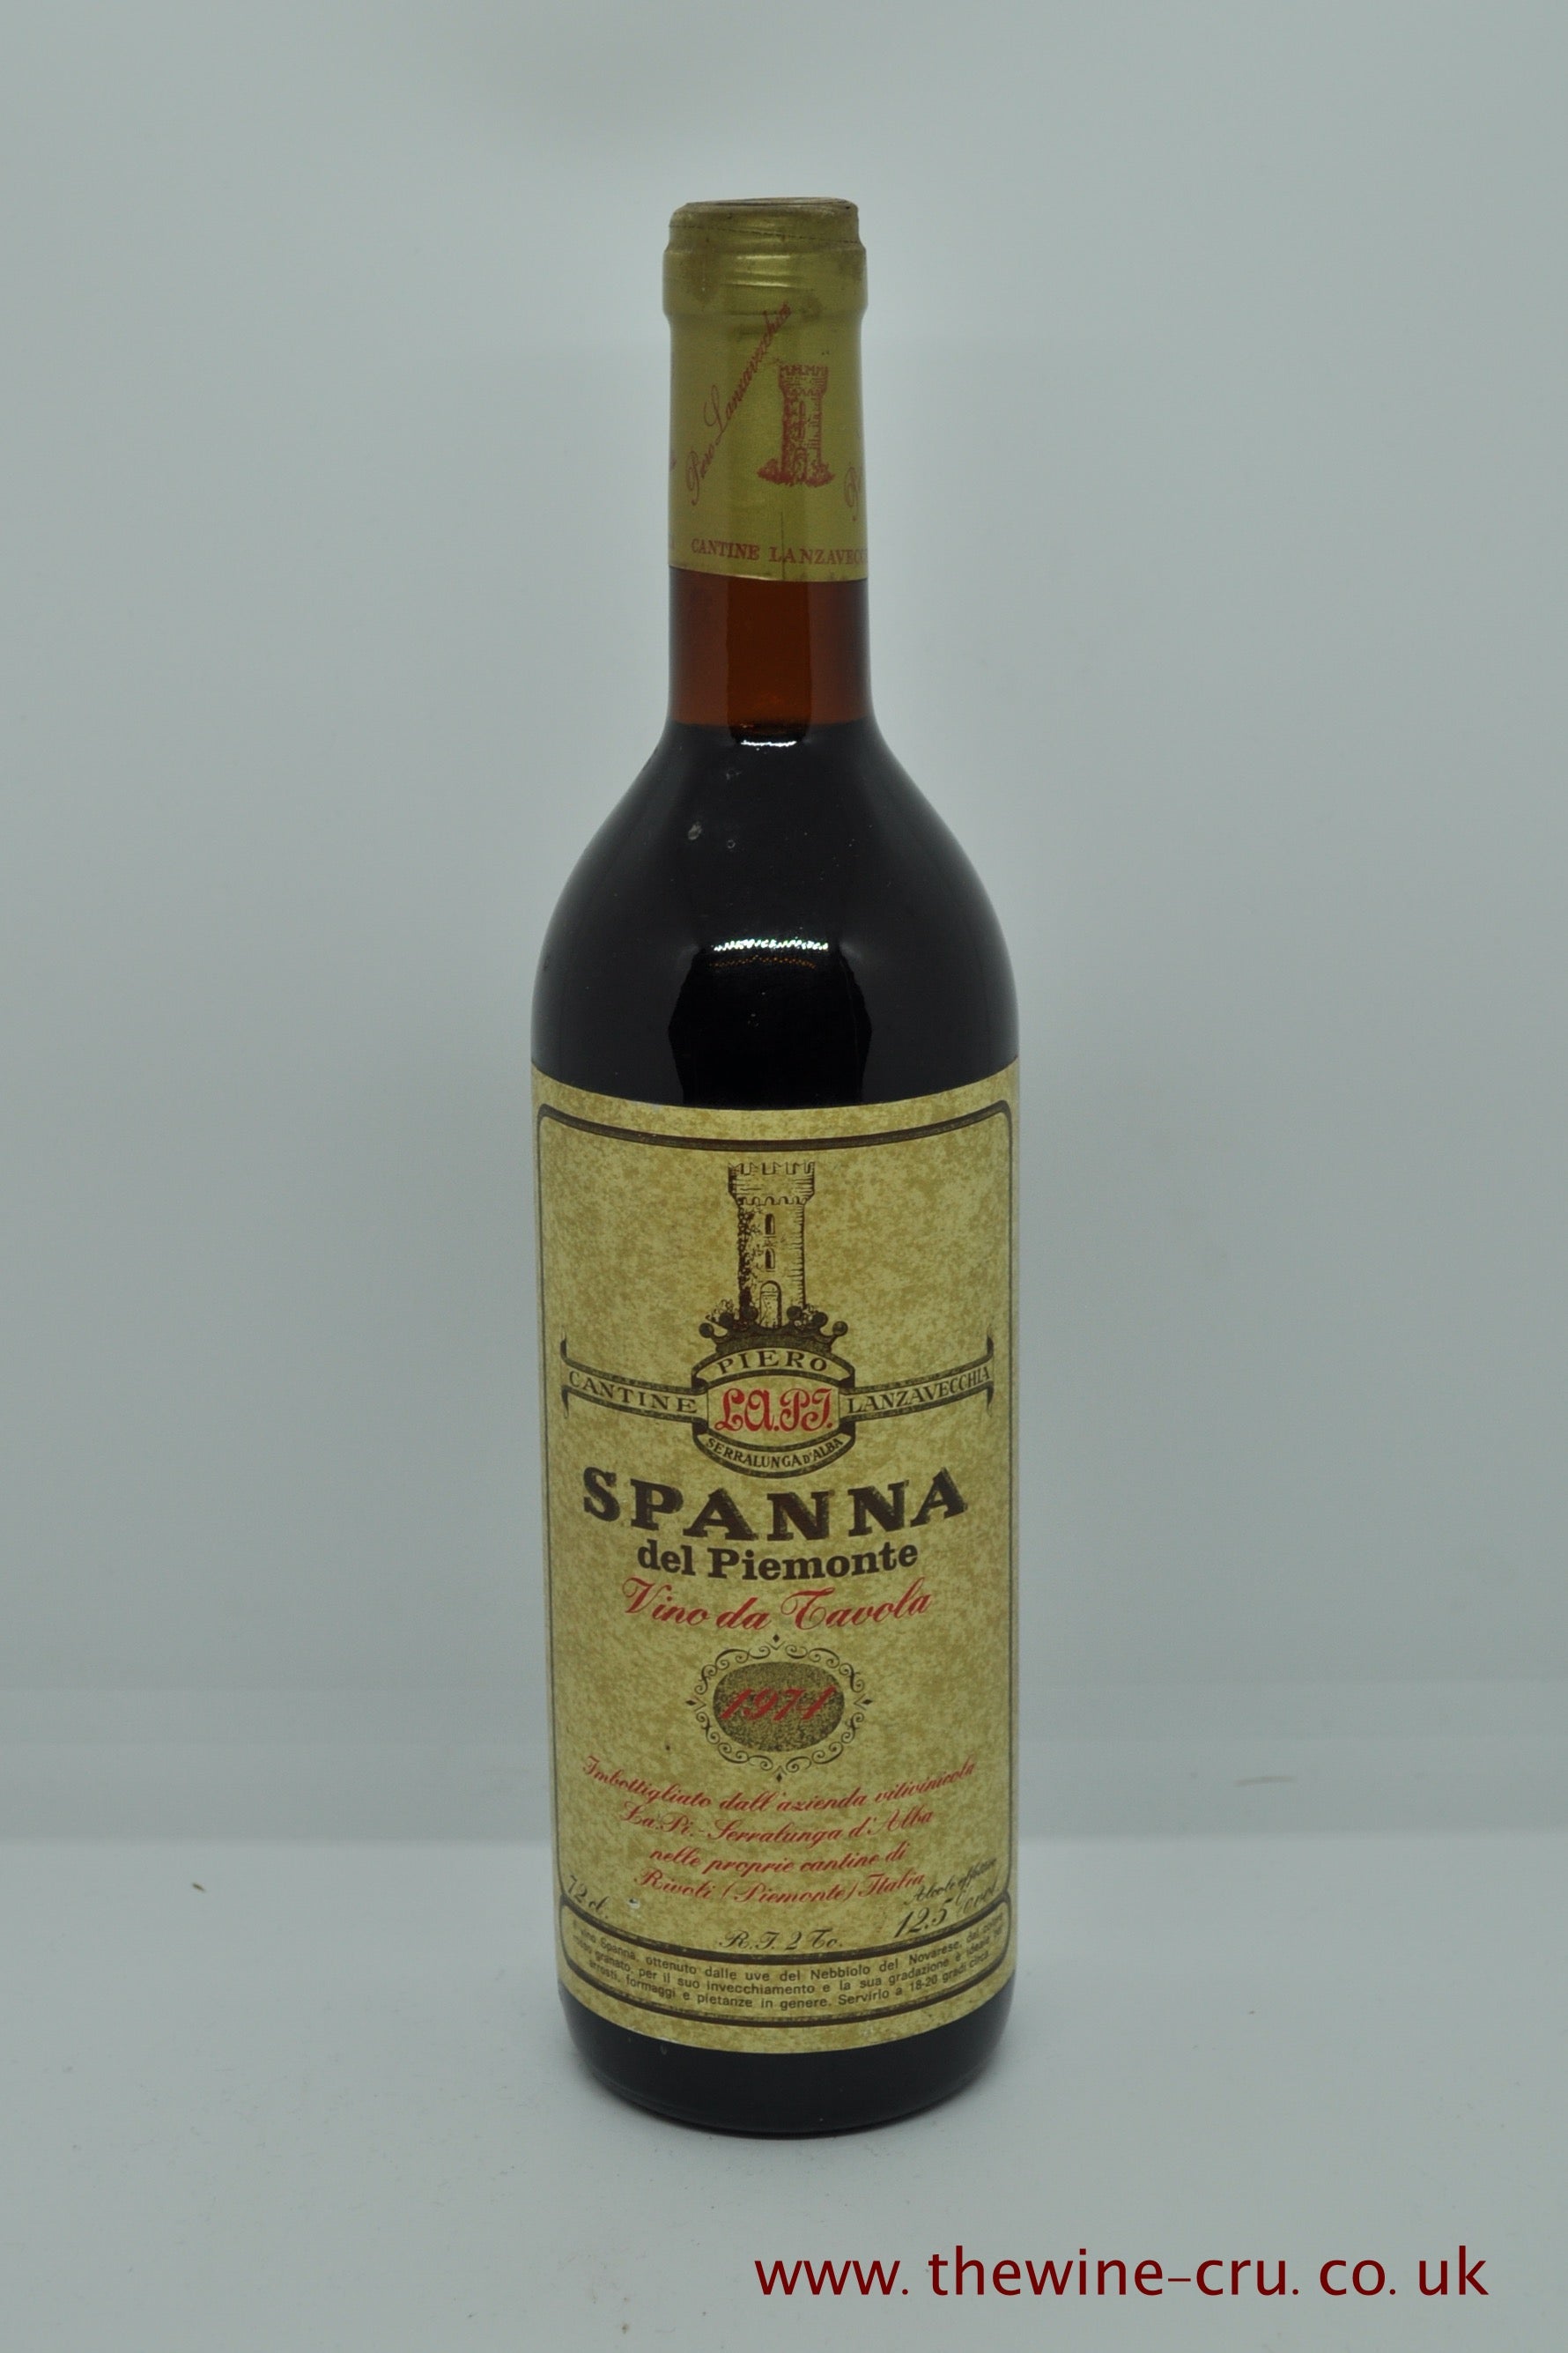 A bottle of 1974 vintage red wine. Spanna del Piemonte. Italy. The bottle is in good condition with the wine level being base of neck. Immediate delivery. Free local delivery. Gift wrapping available.